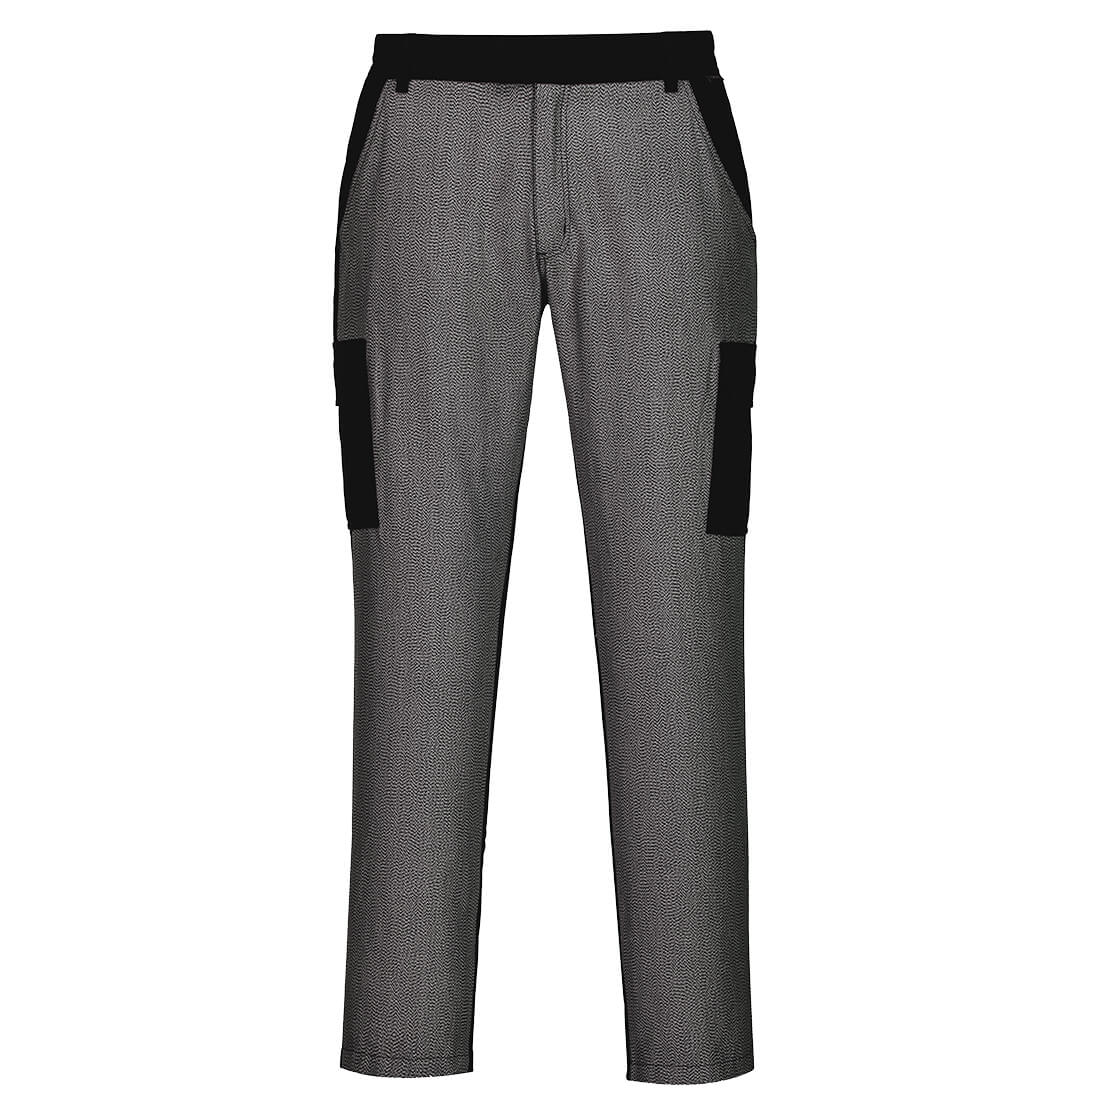 Combat Trousers with Cut Resistant Front, Morgans PW